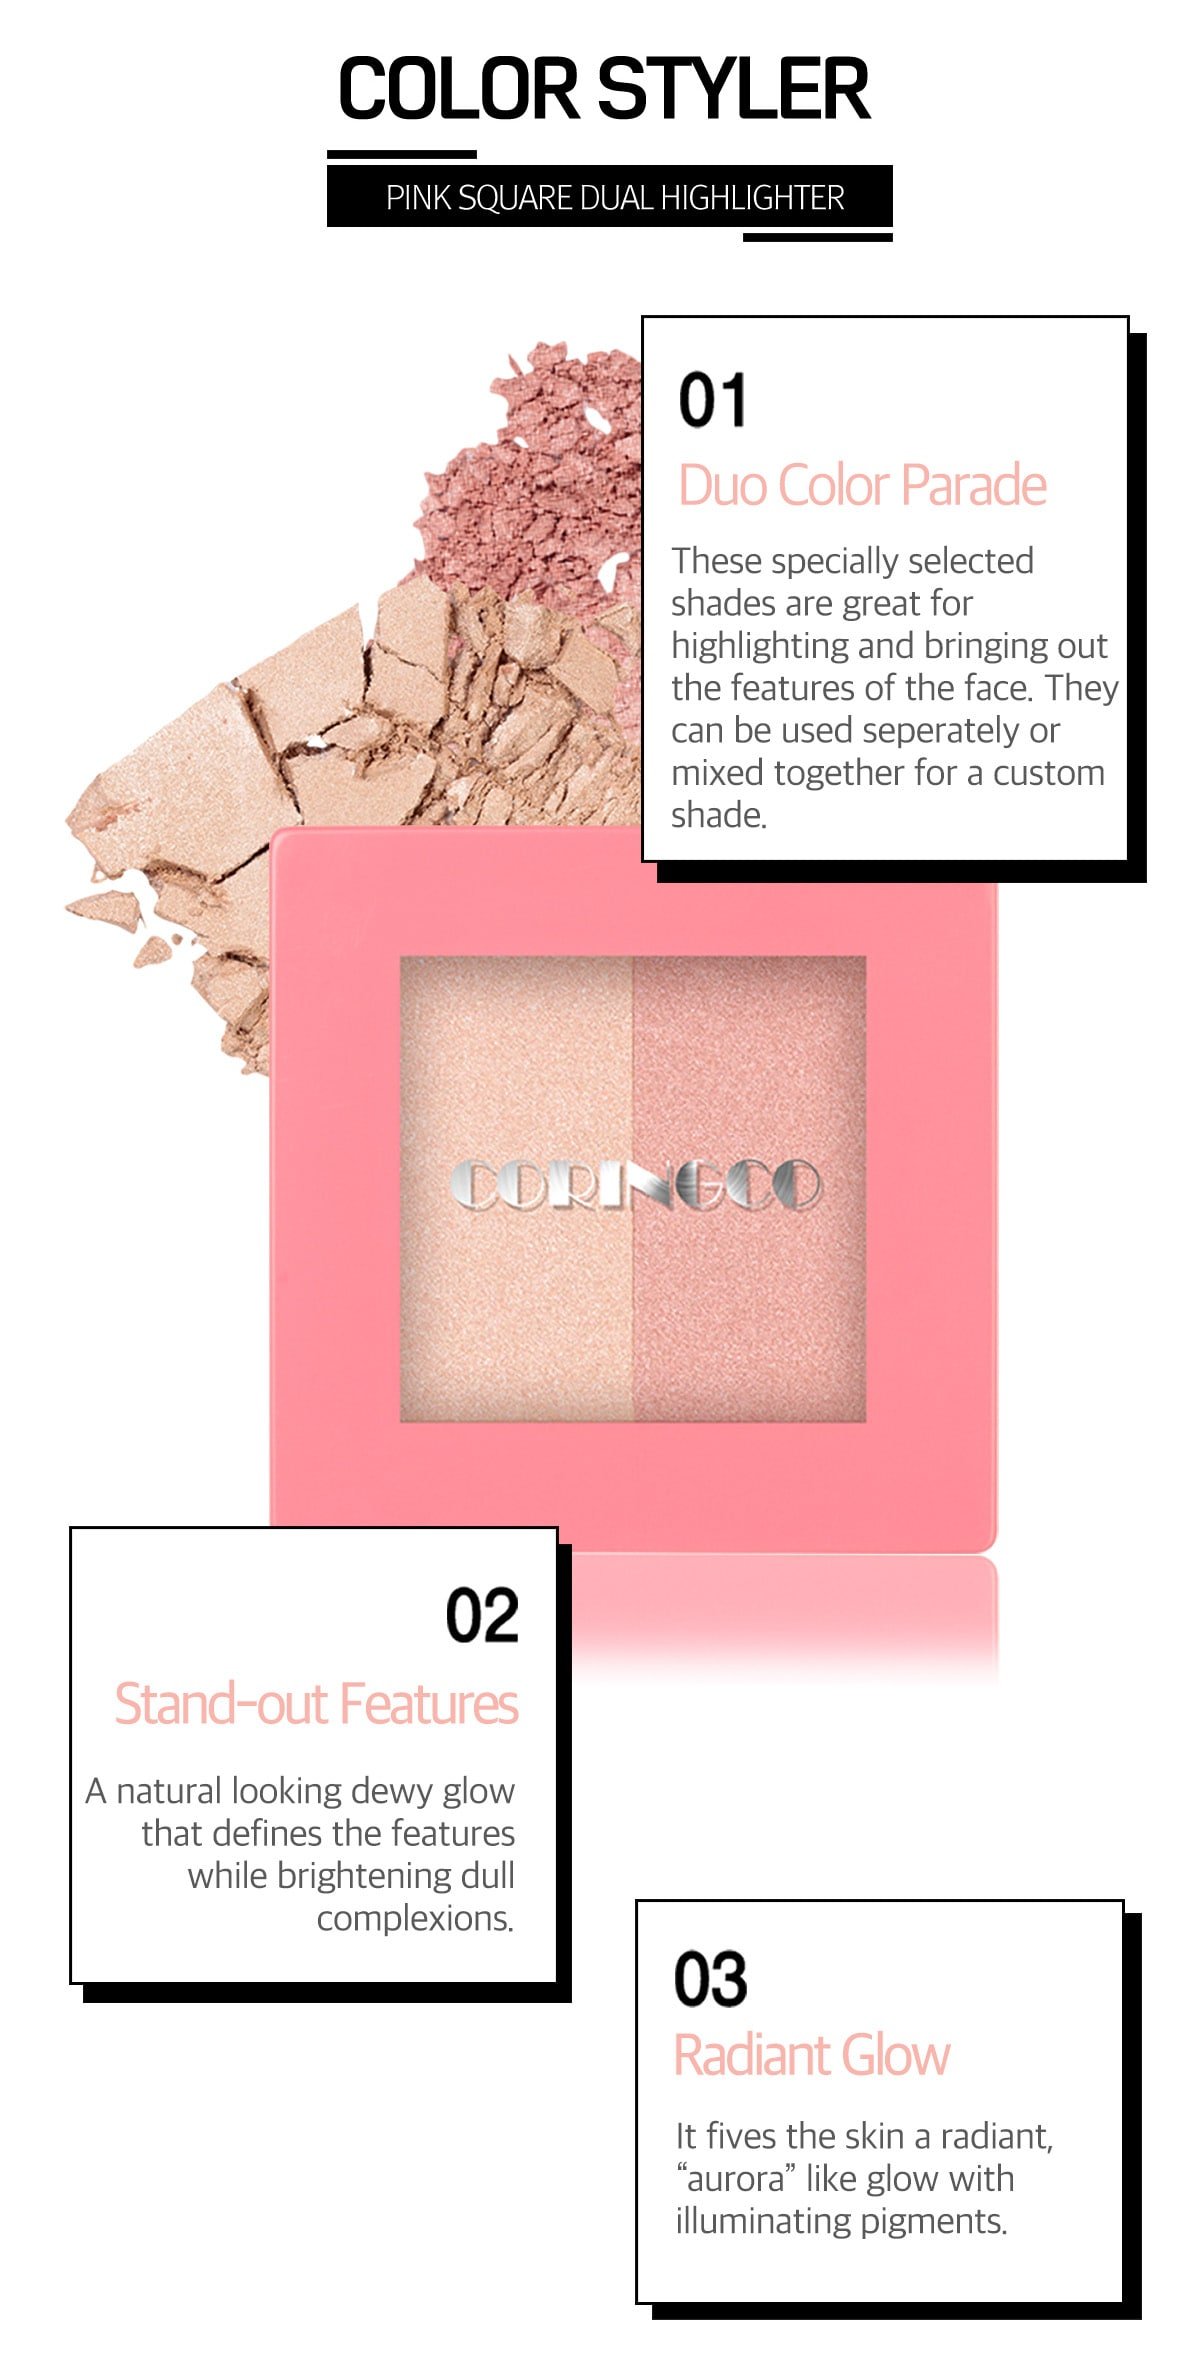 Pink Square Dual Highlighter - Color Styler